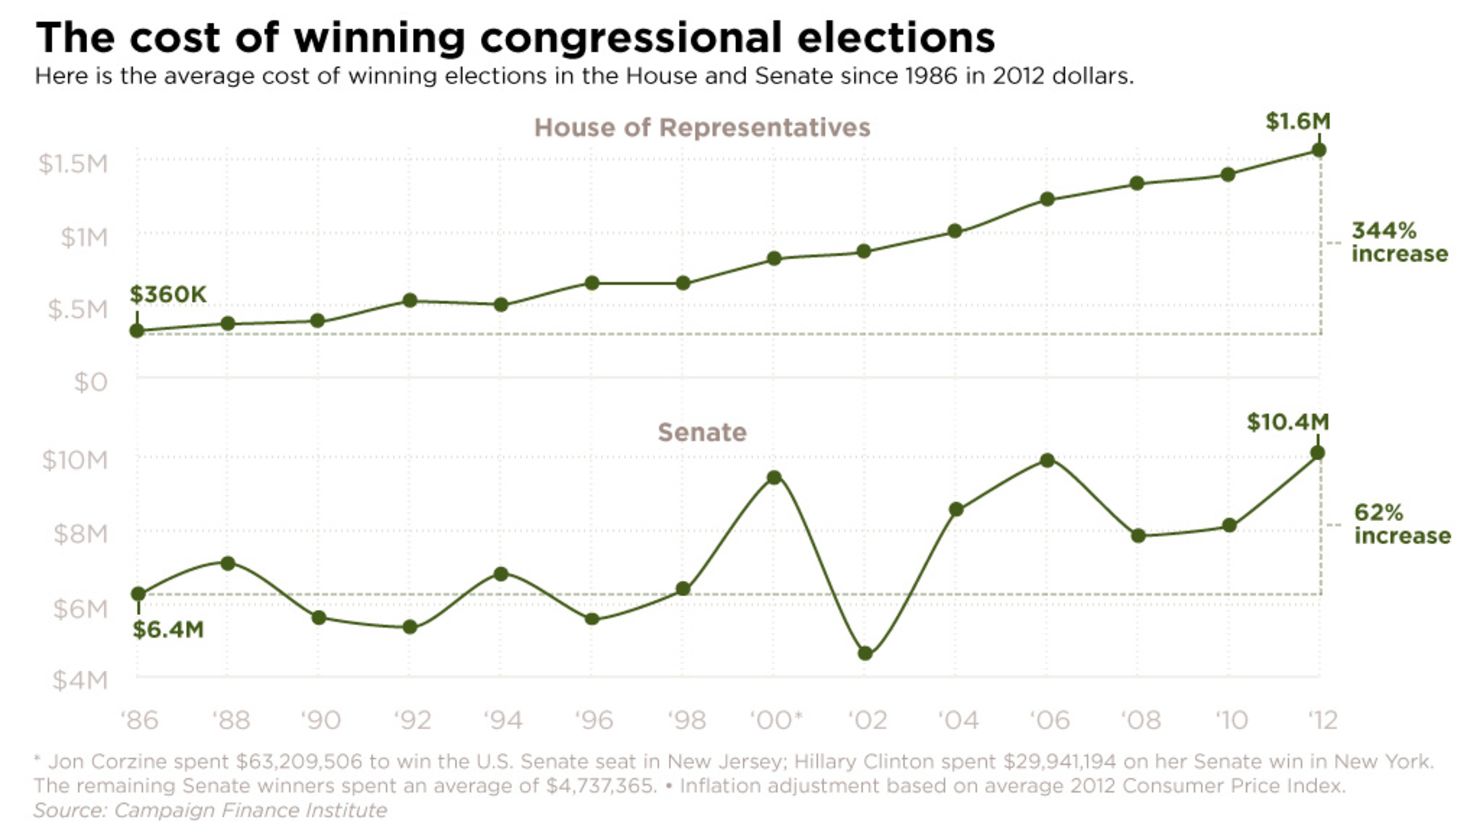 Average cost of winning elections in the House and Senate since 1986 in 2012 dollars